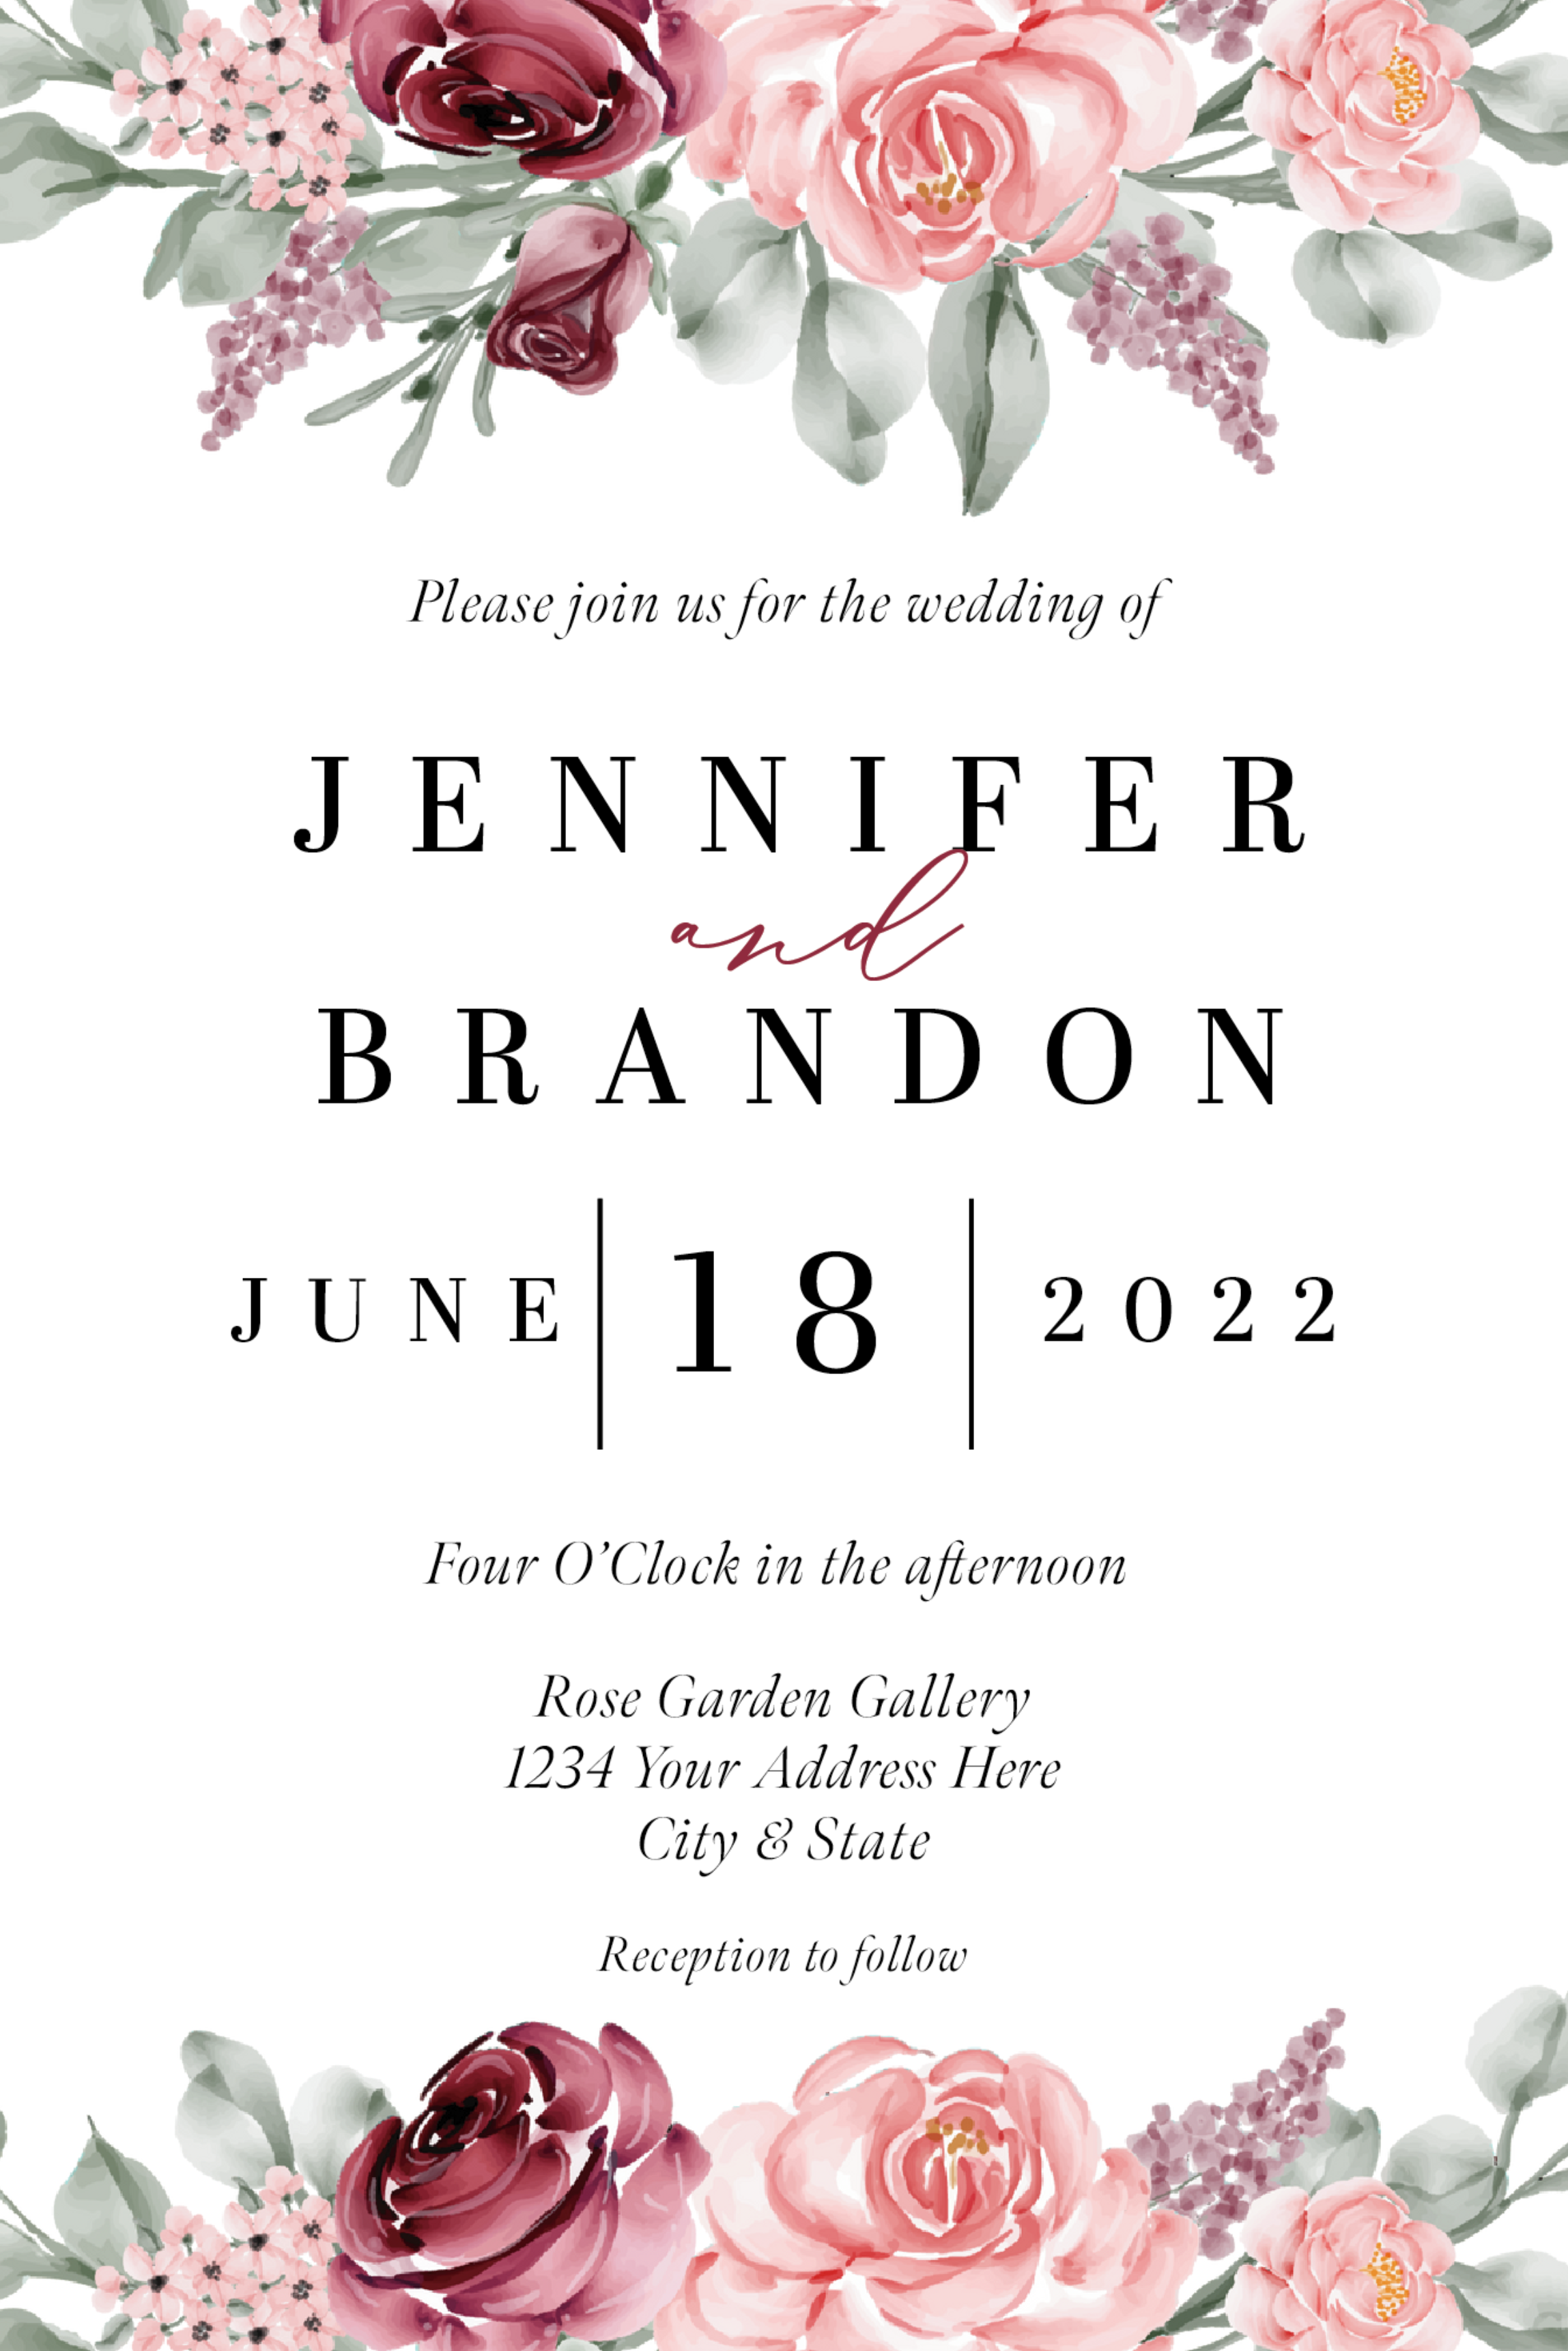 Green Rustic Wedding Pinterest Graphic.png